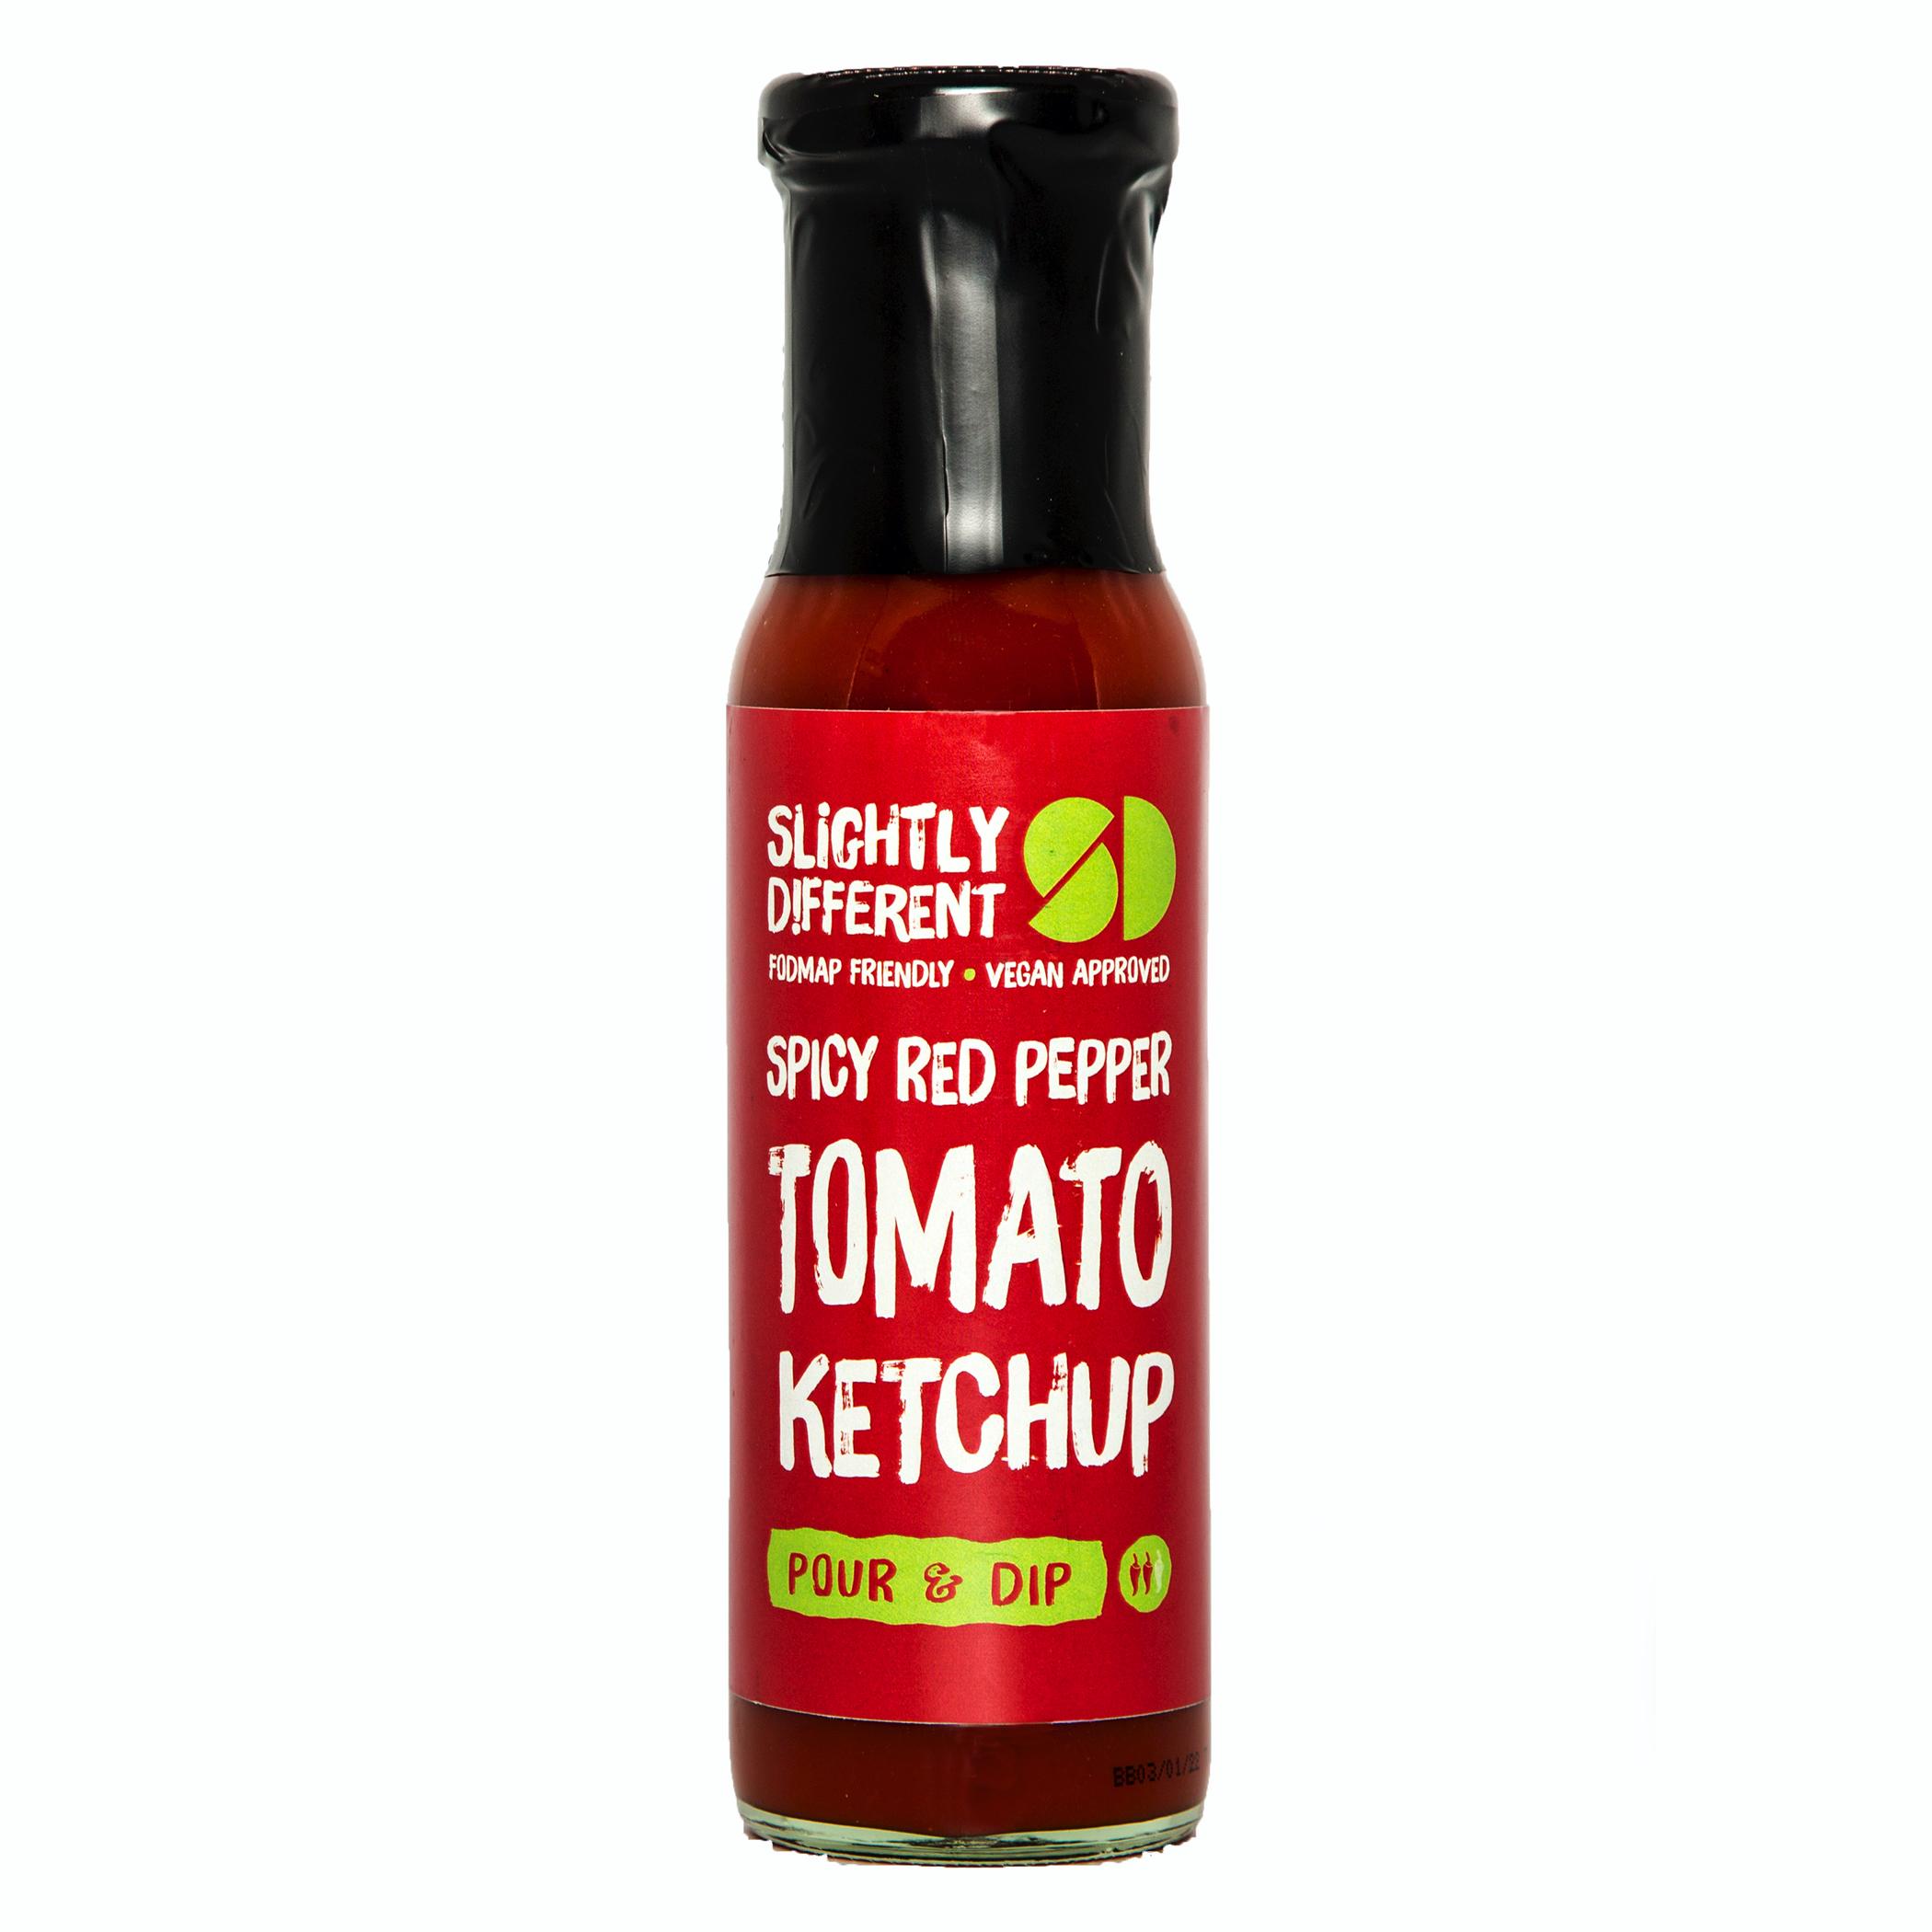 A bottle of Slightly Different's Spicy Red Pepper Tomato Ketchup